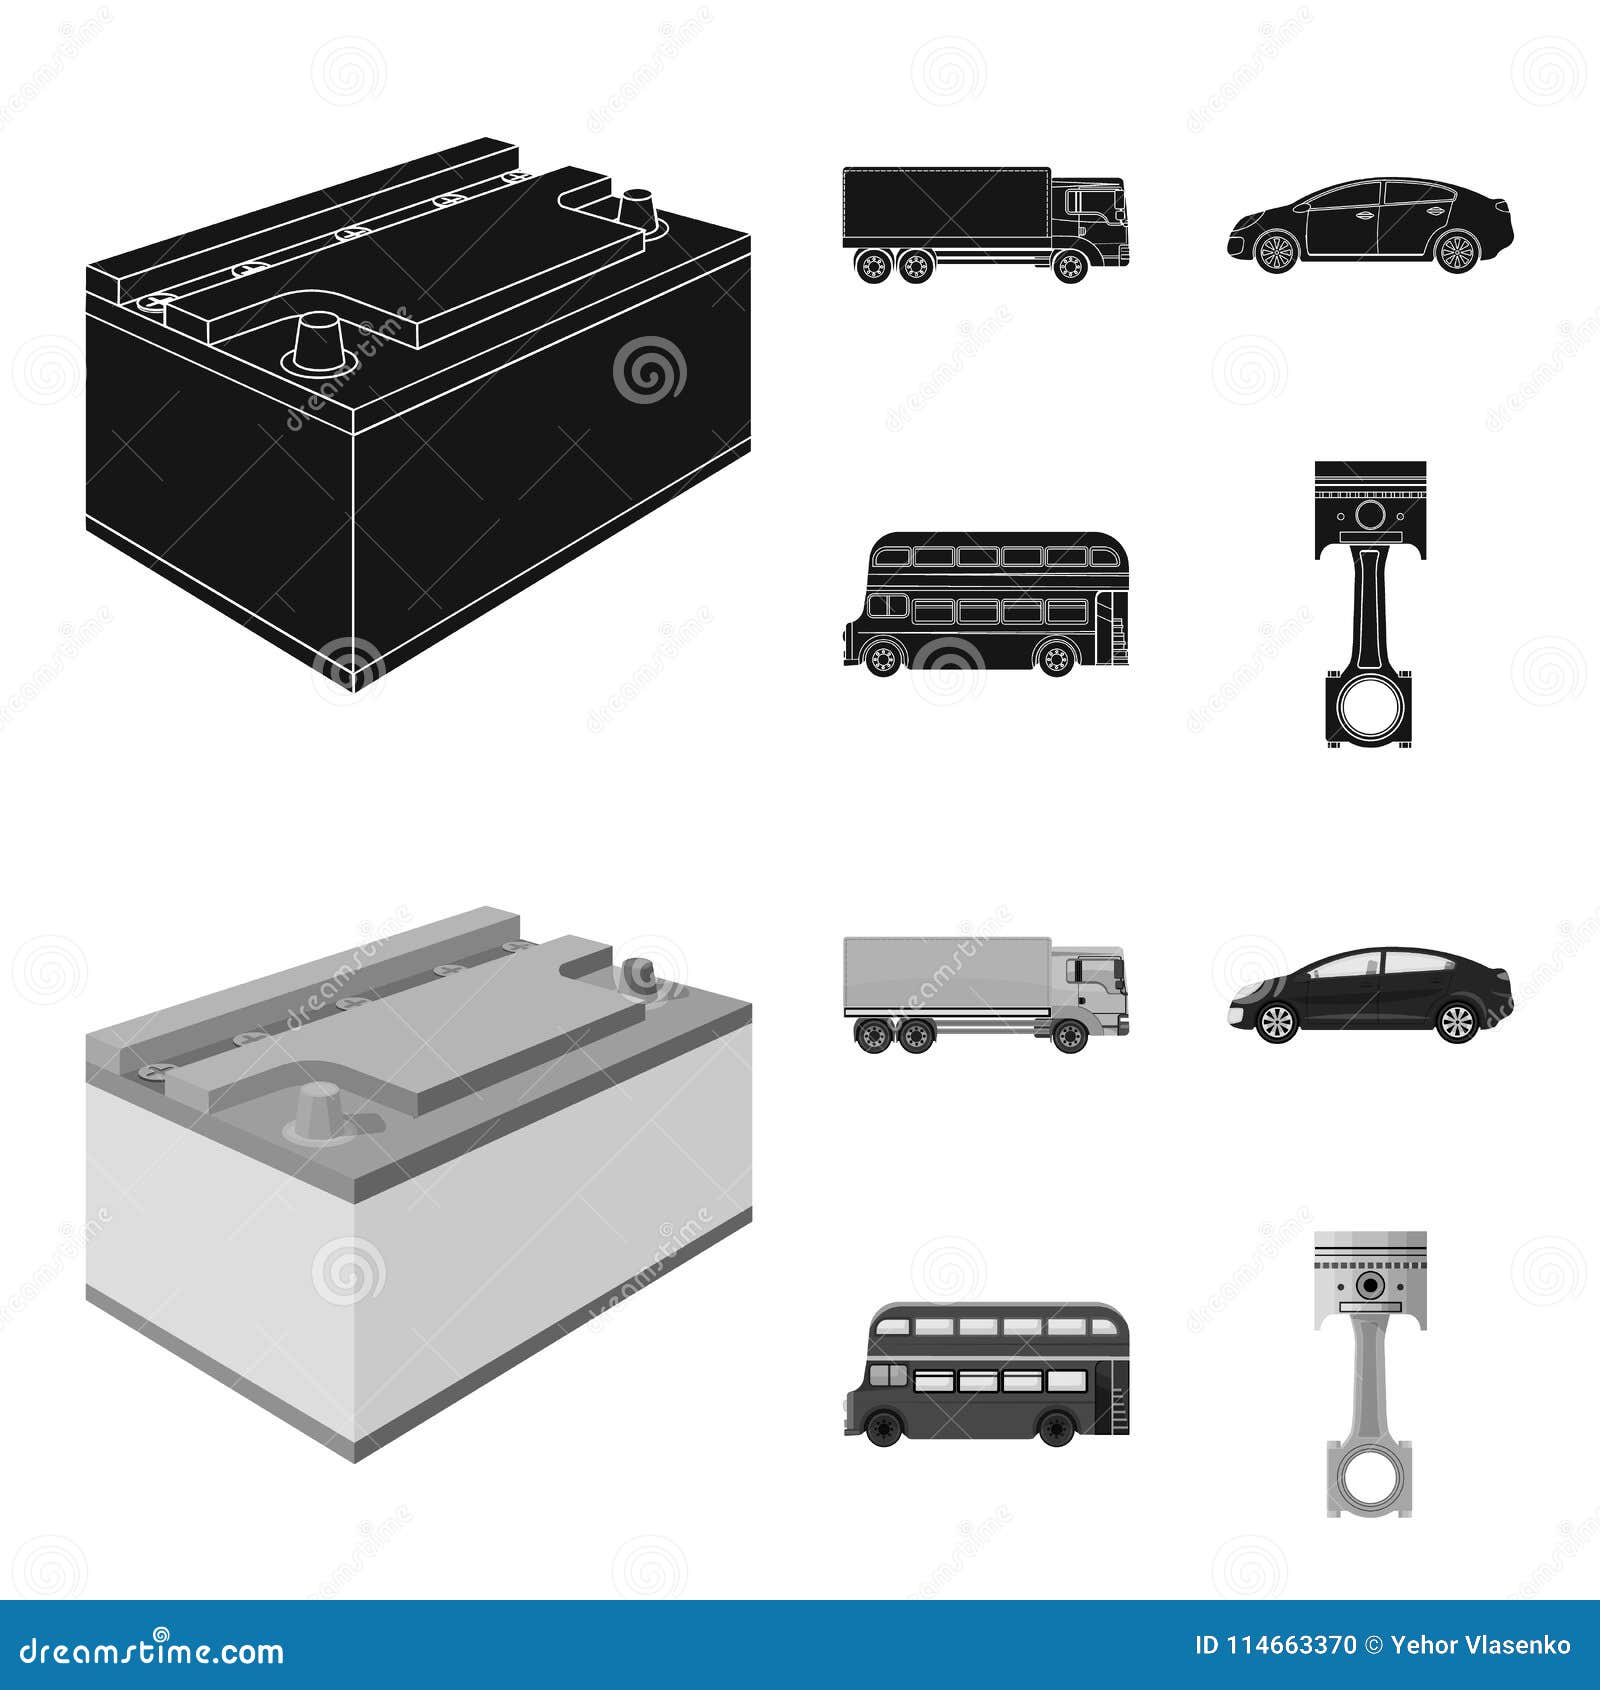 battery and transport black,monochrom icons in set collection for .car maintenance station   stock